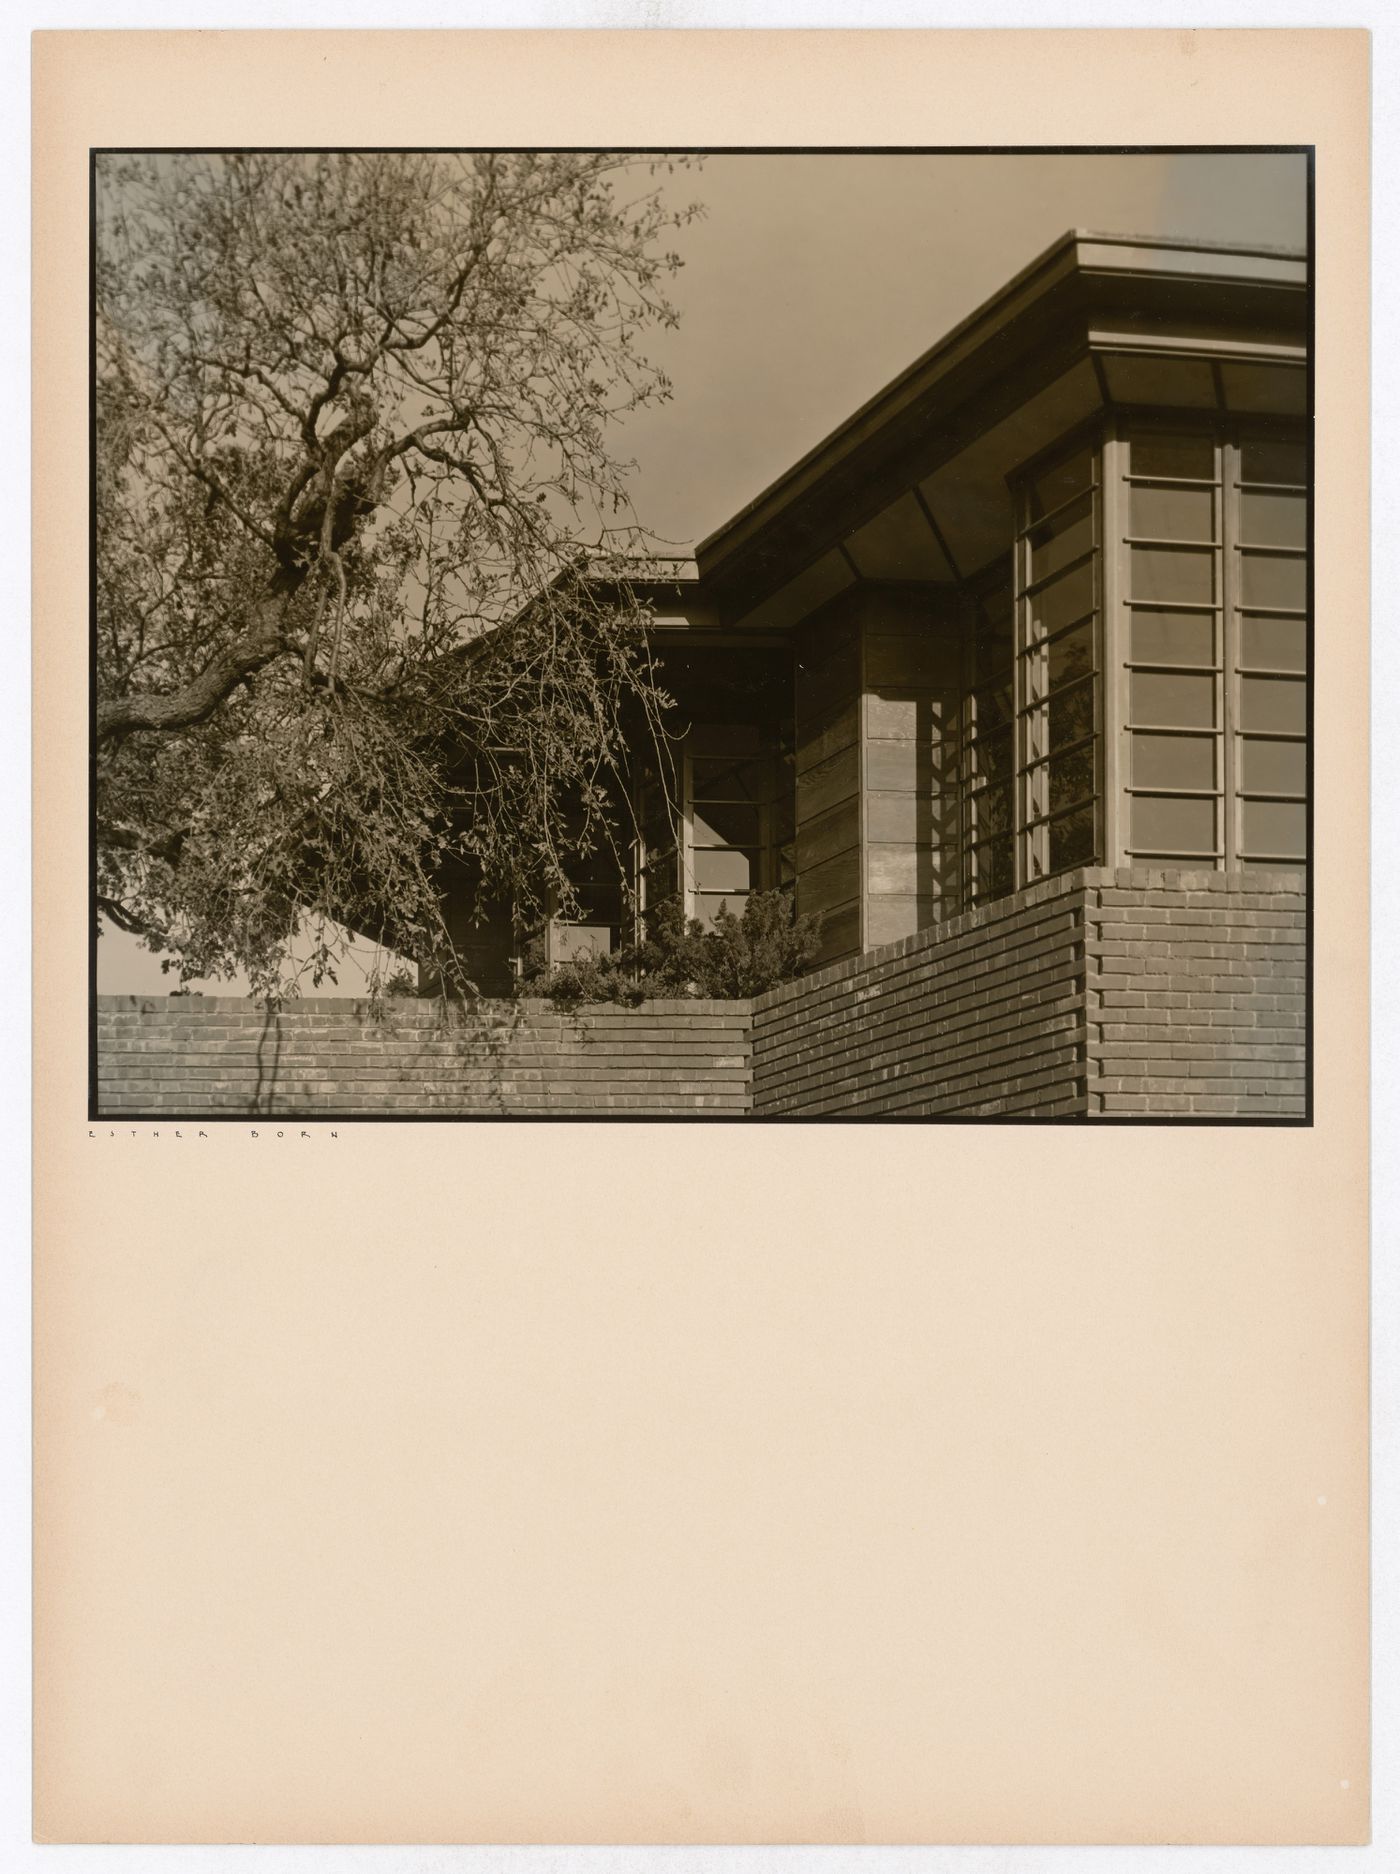 Partial view of the Hanna House showing windows, overhangs and a tree, Palo Alto, California, United States